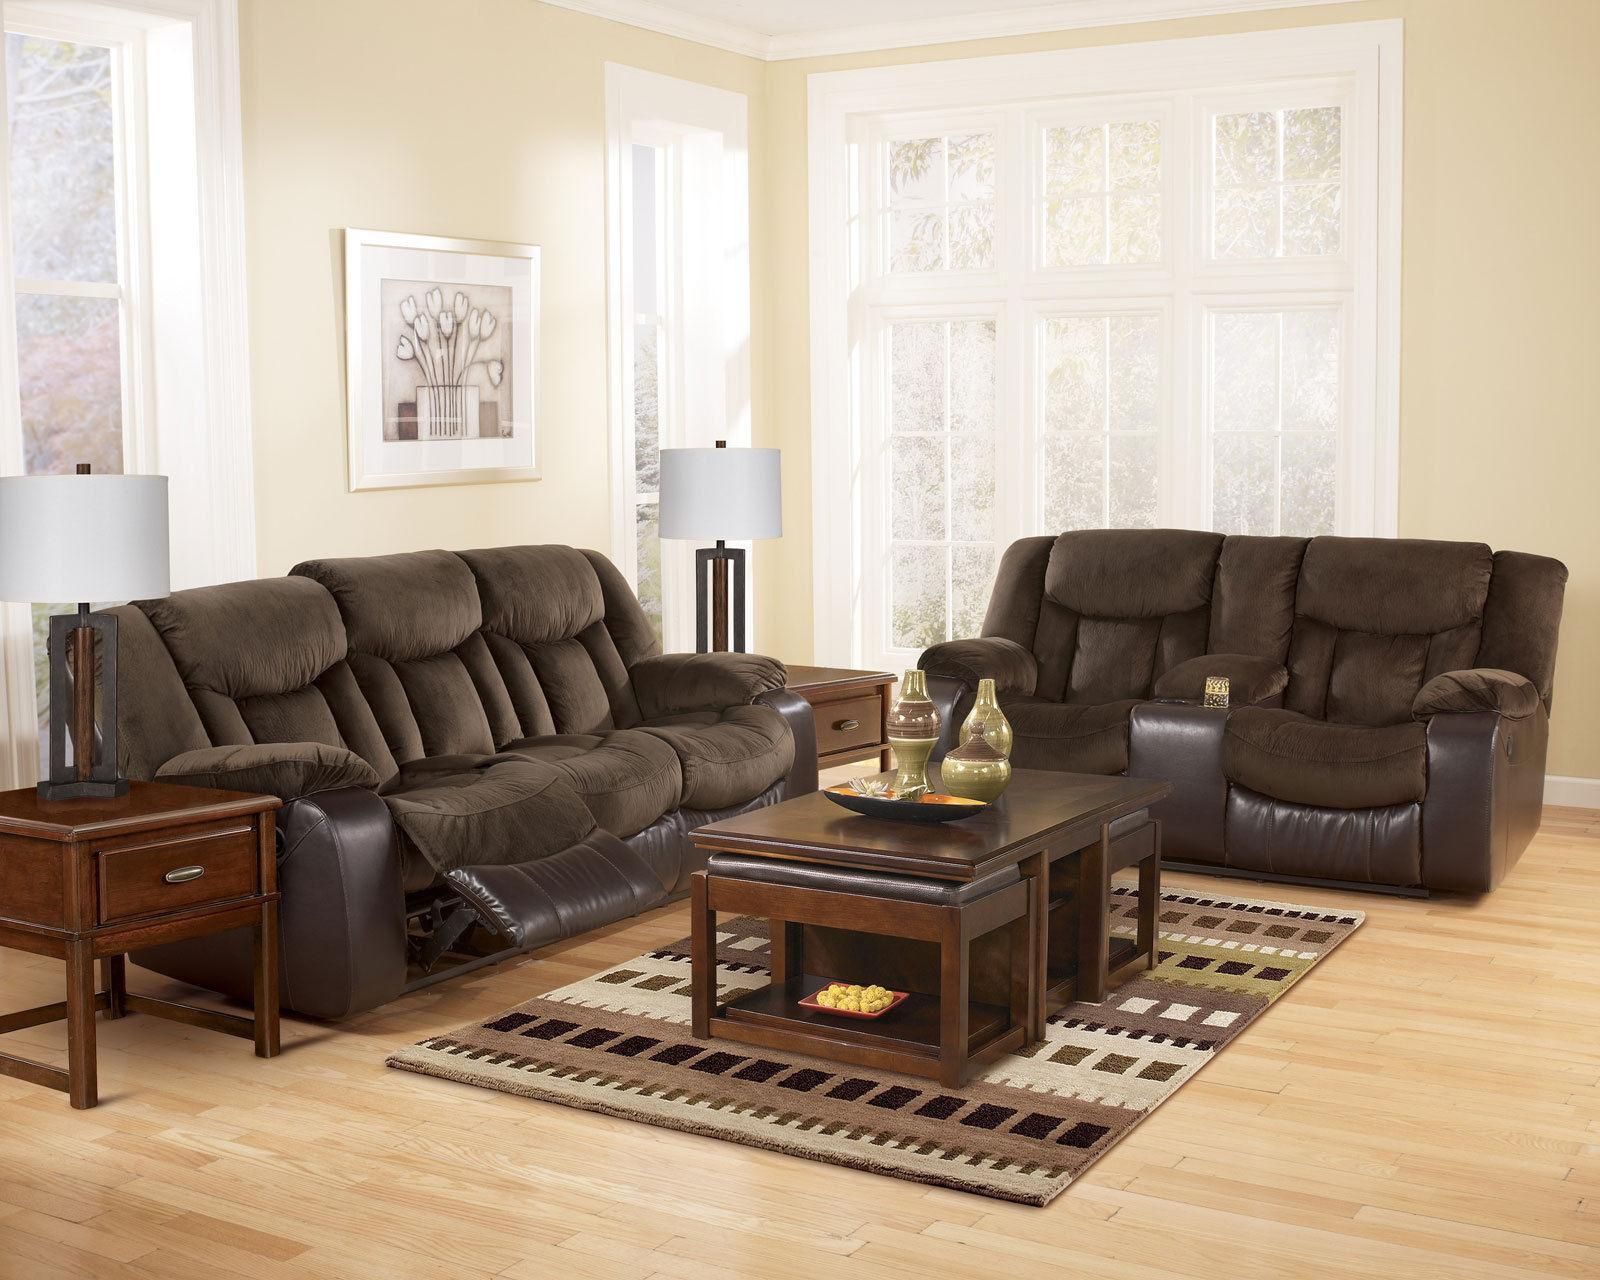 Allegro Living Room Brown Microfiber & Faux Leather Reclining Sofa In Faux Leather Sofas In Chocolate Brown (View 18 of 20)